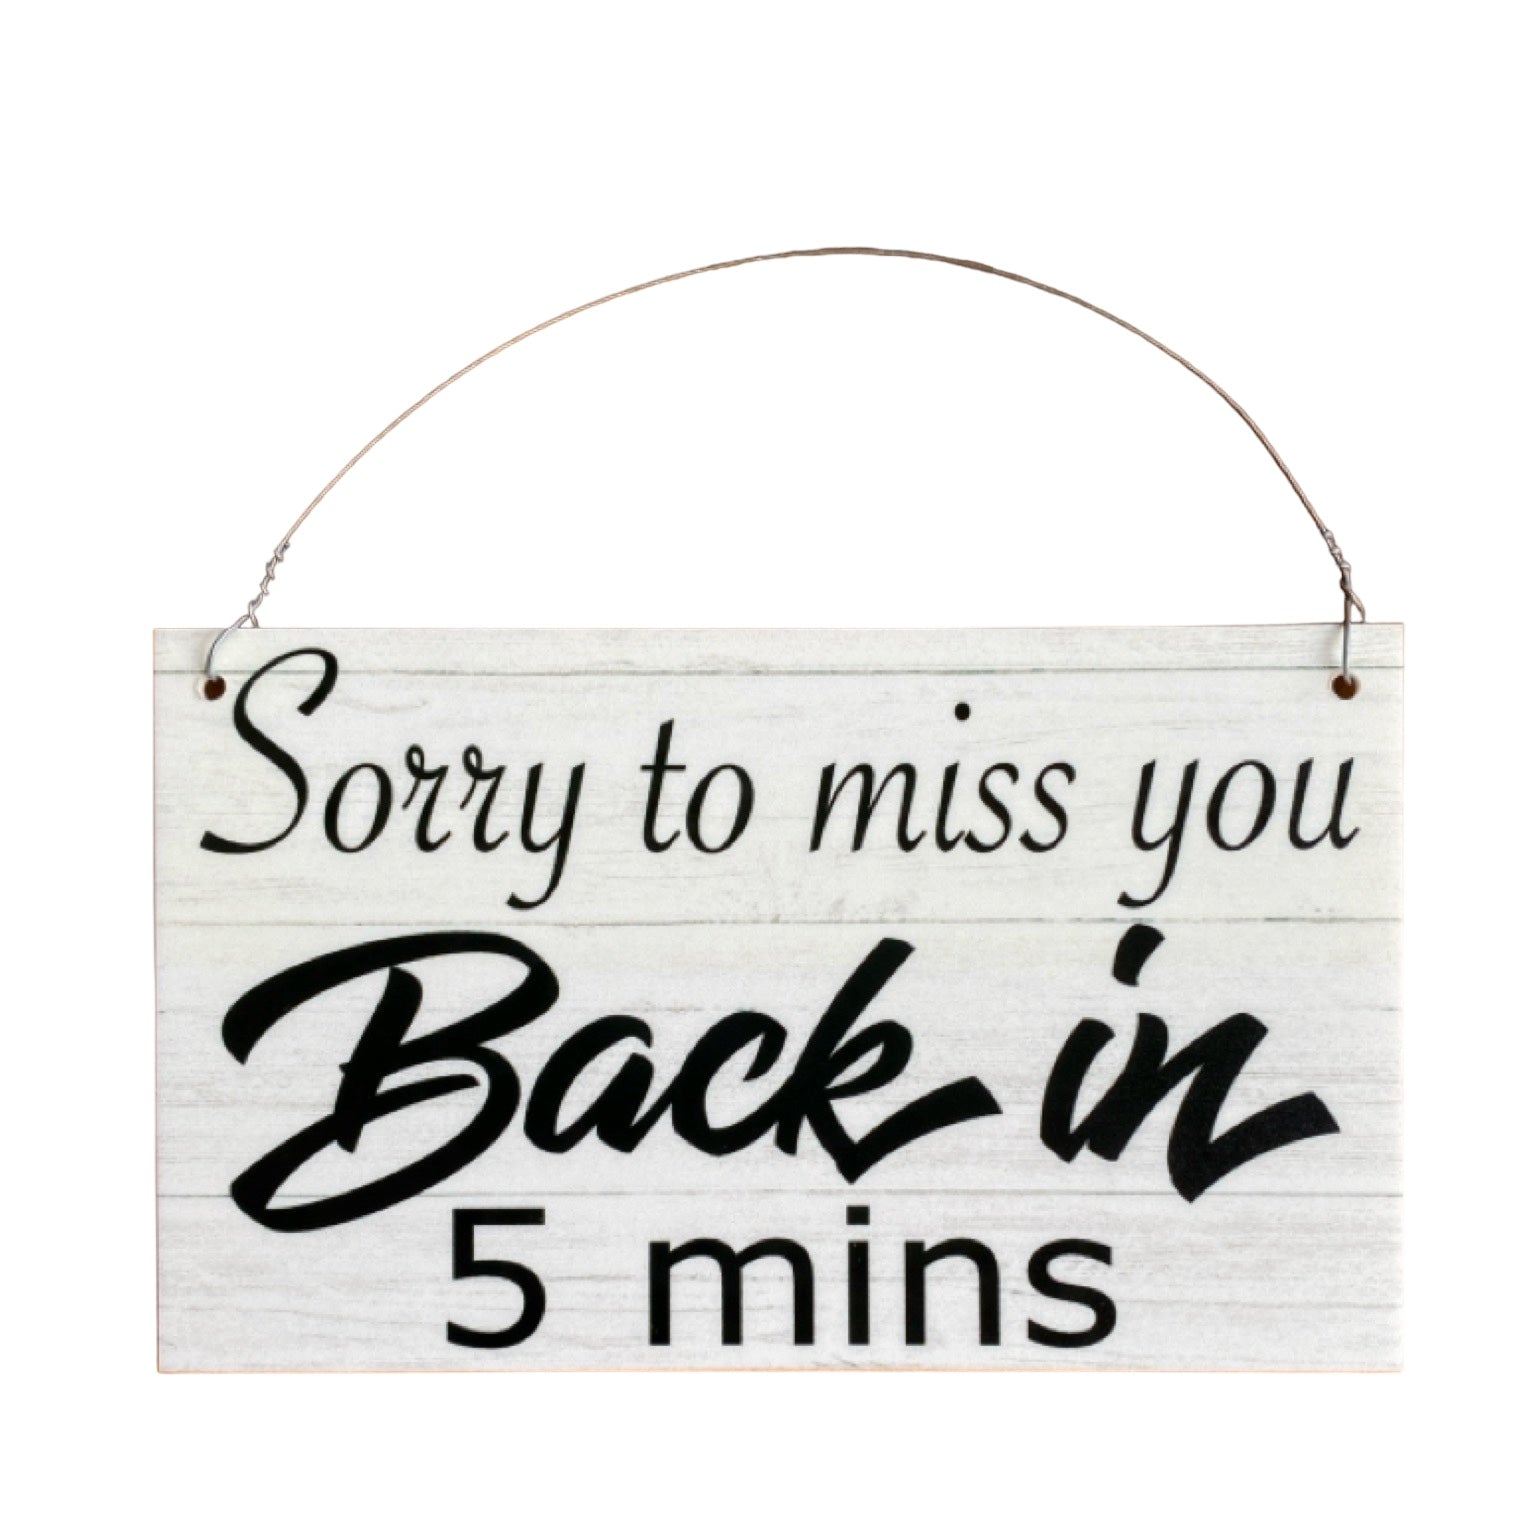 Sorry To Miss You Back In 5 Mins Business Shop Staff Sign - The Renmy Store Homewares & Gifts 